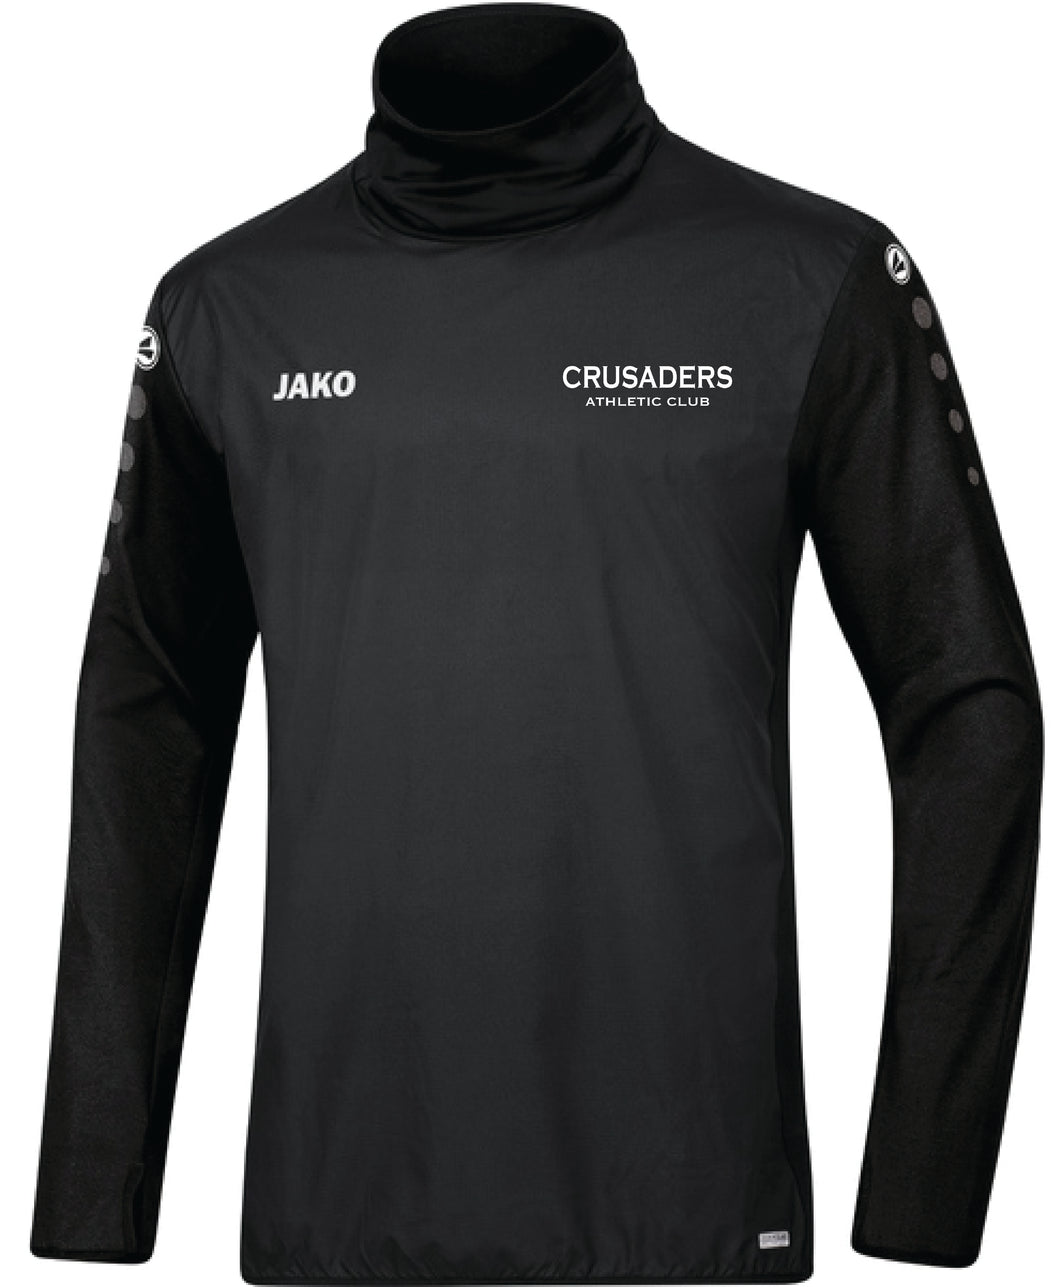 Adult JAKO Crusaders AC Winter Top Text Only CACT8896